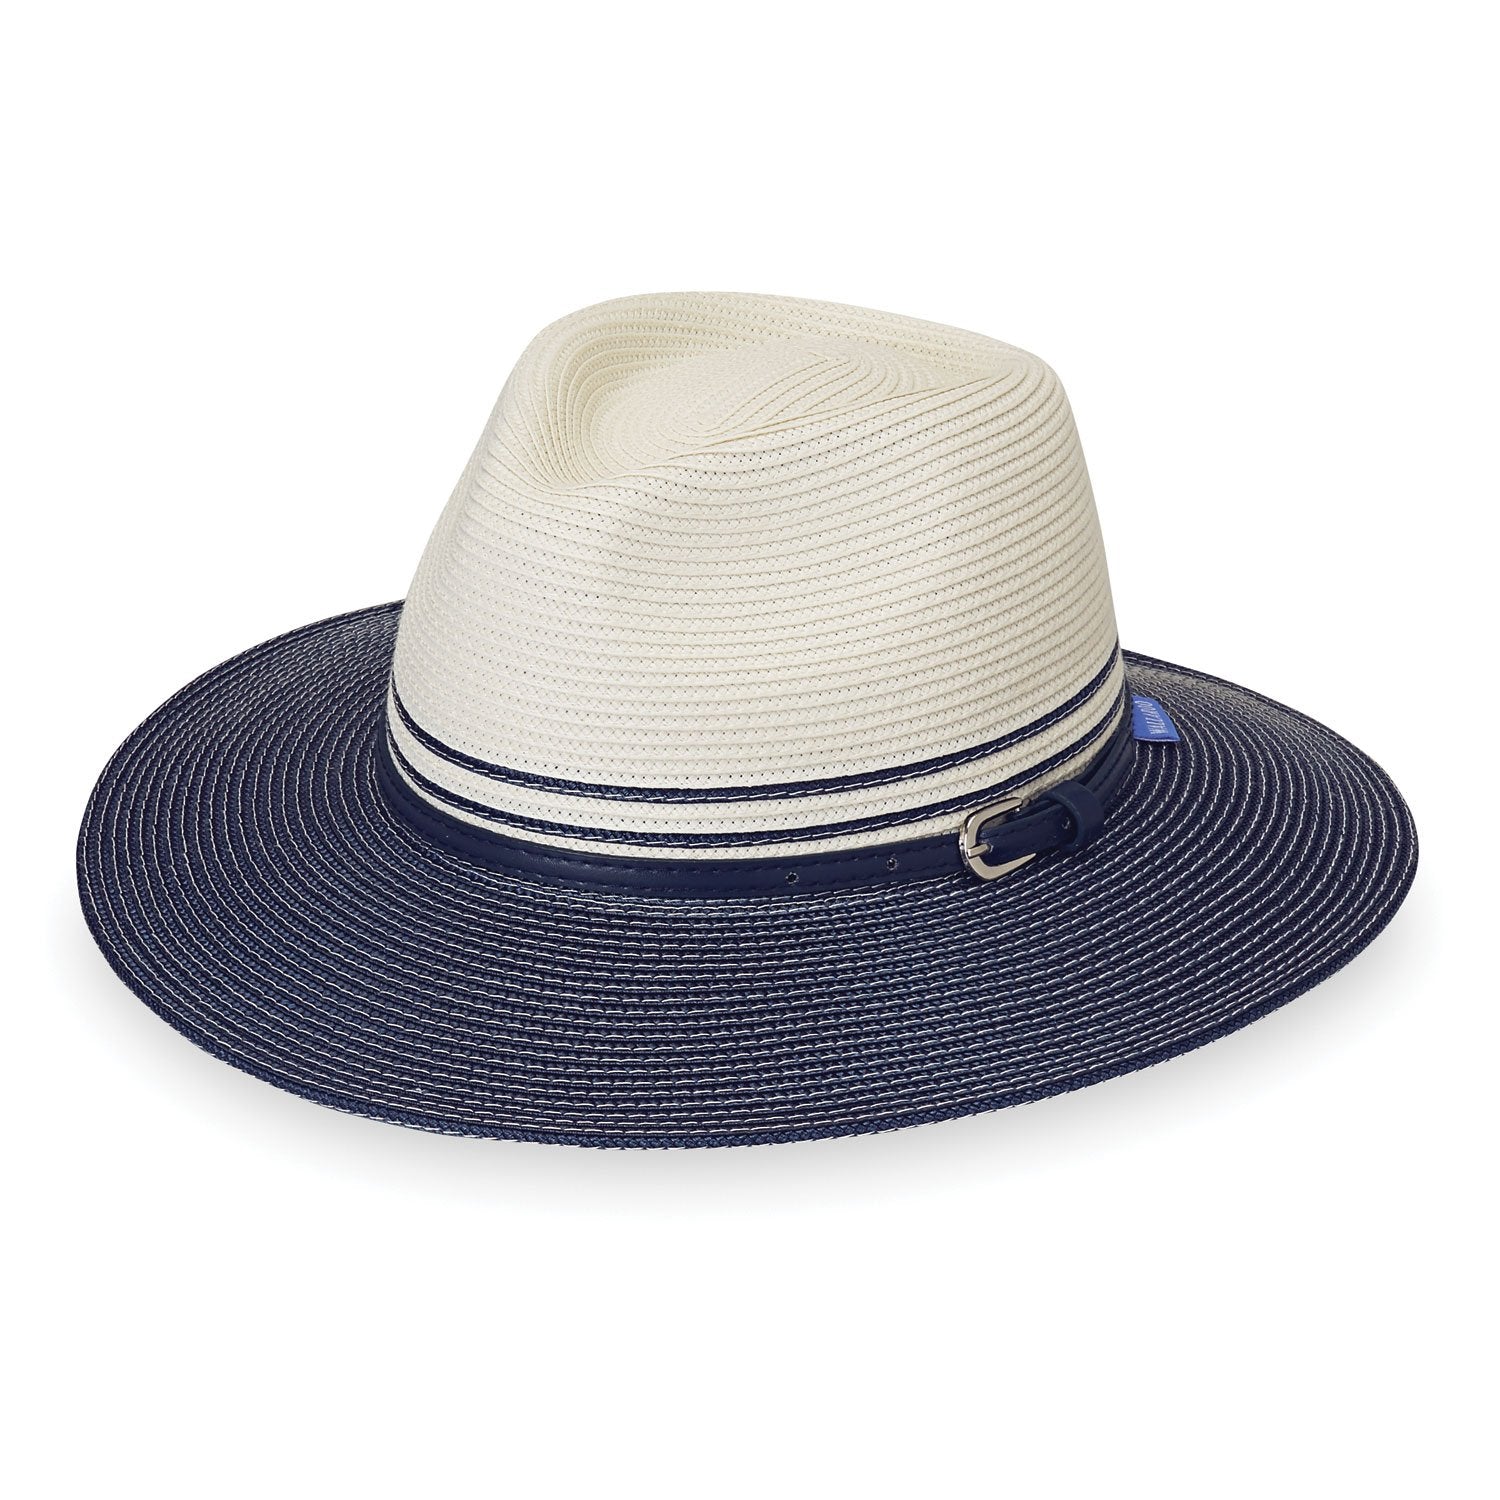 Featuring Front of Women's Packable UPF Fedora Style Kristy Sun Hat in Ivory Navy from Wallaroo